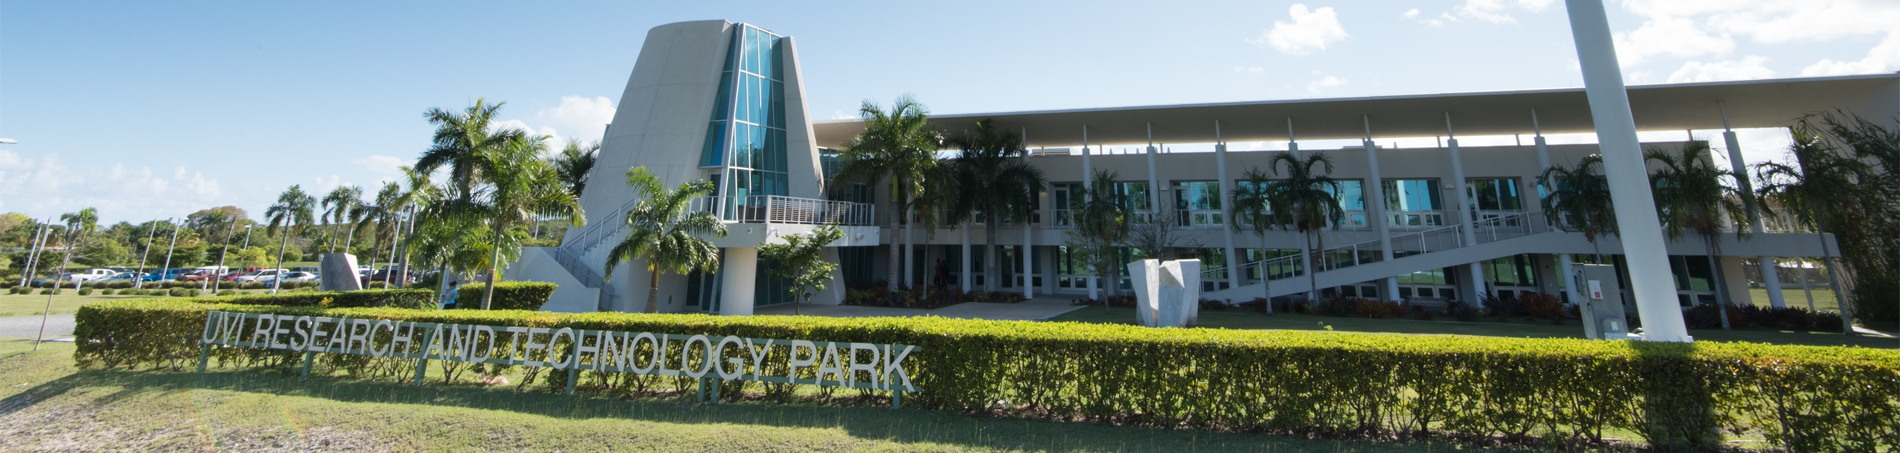 UVI Research and Technology Park